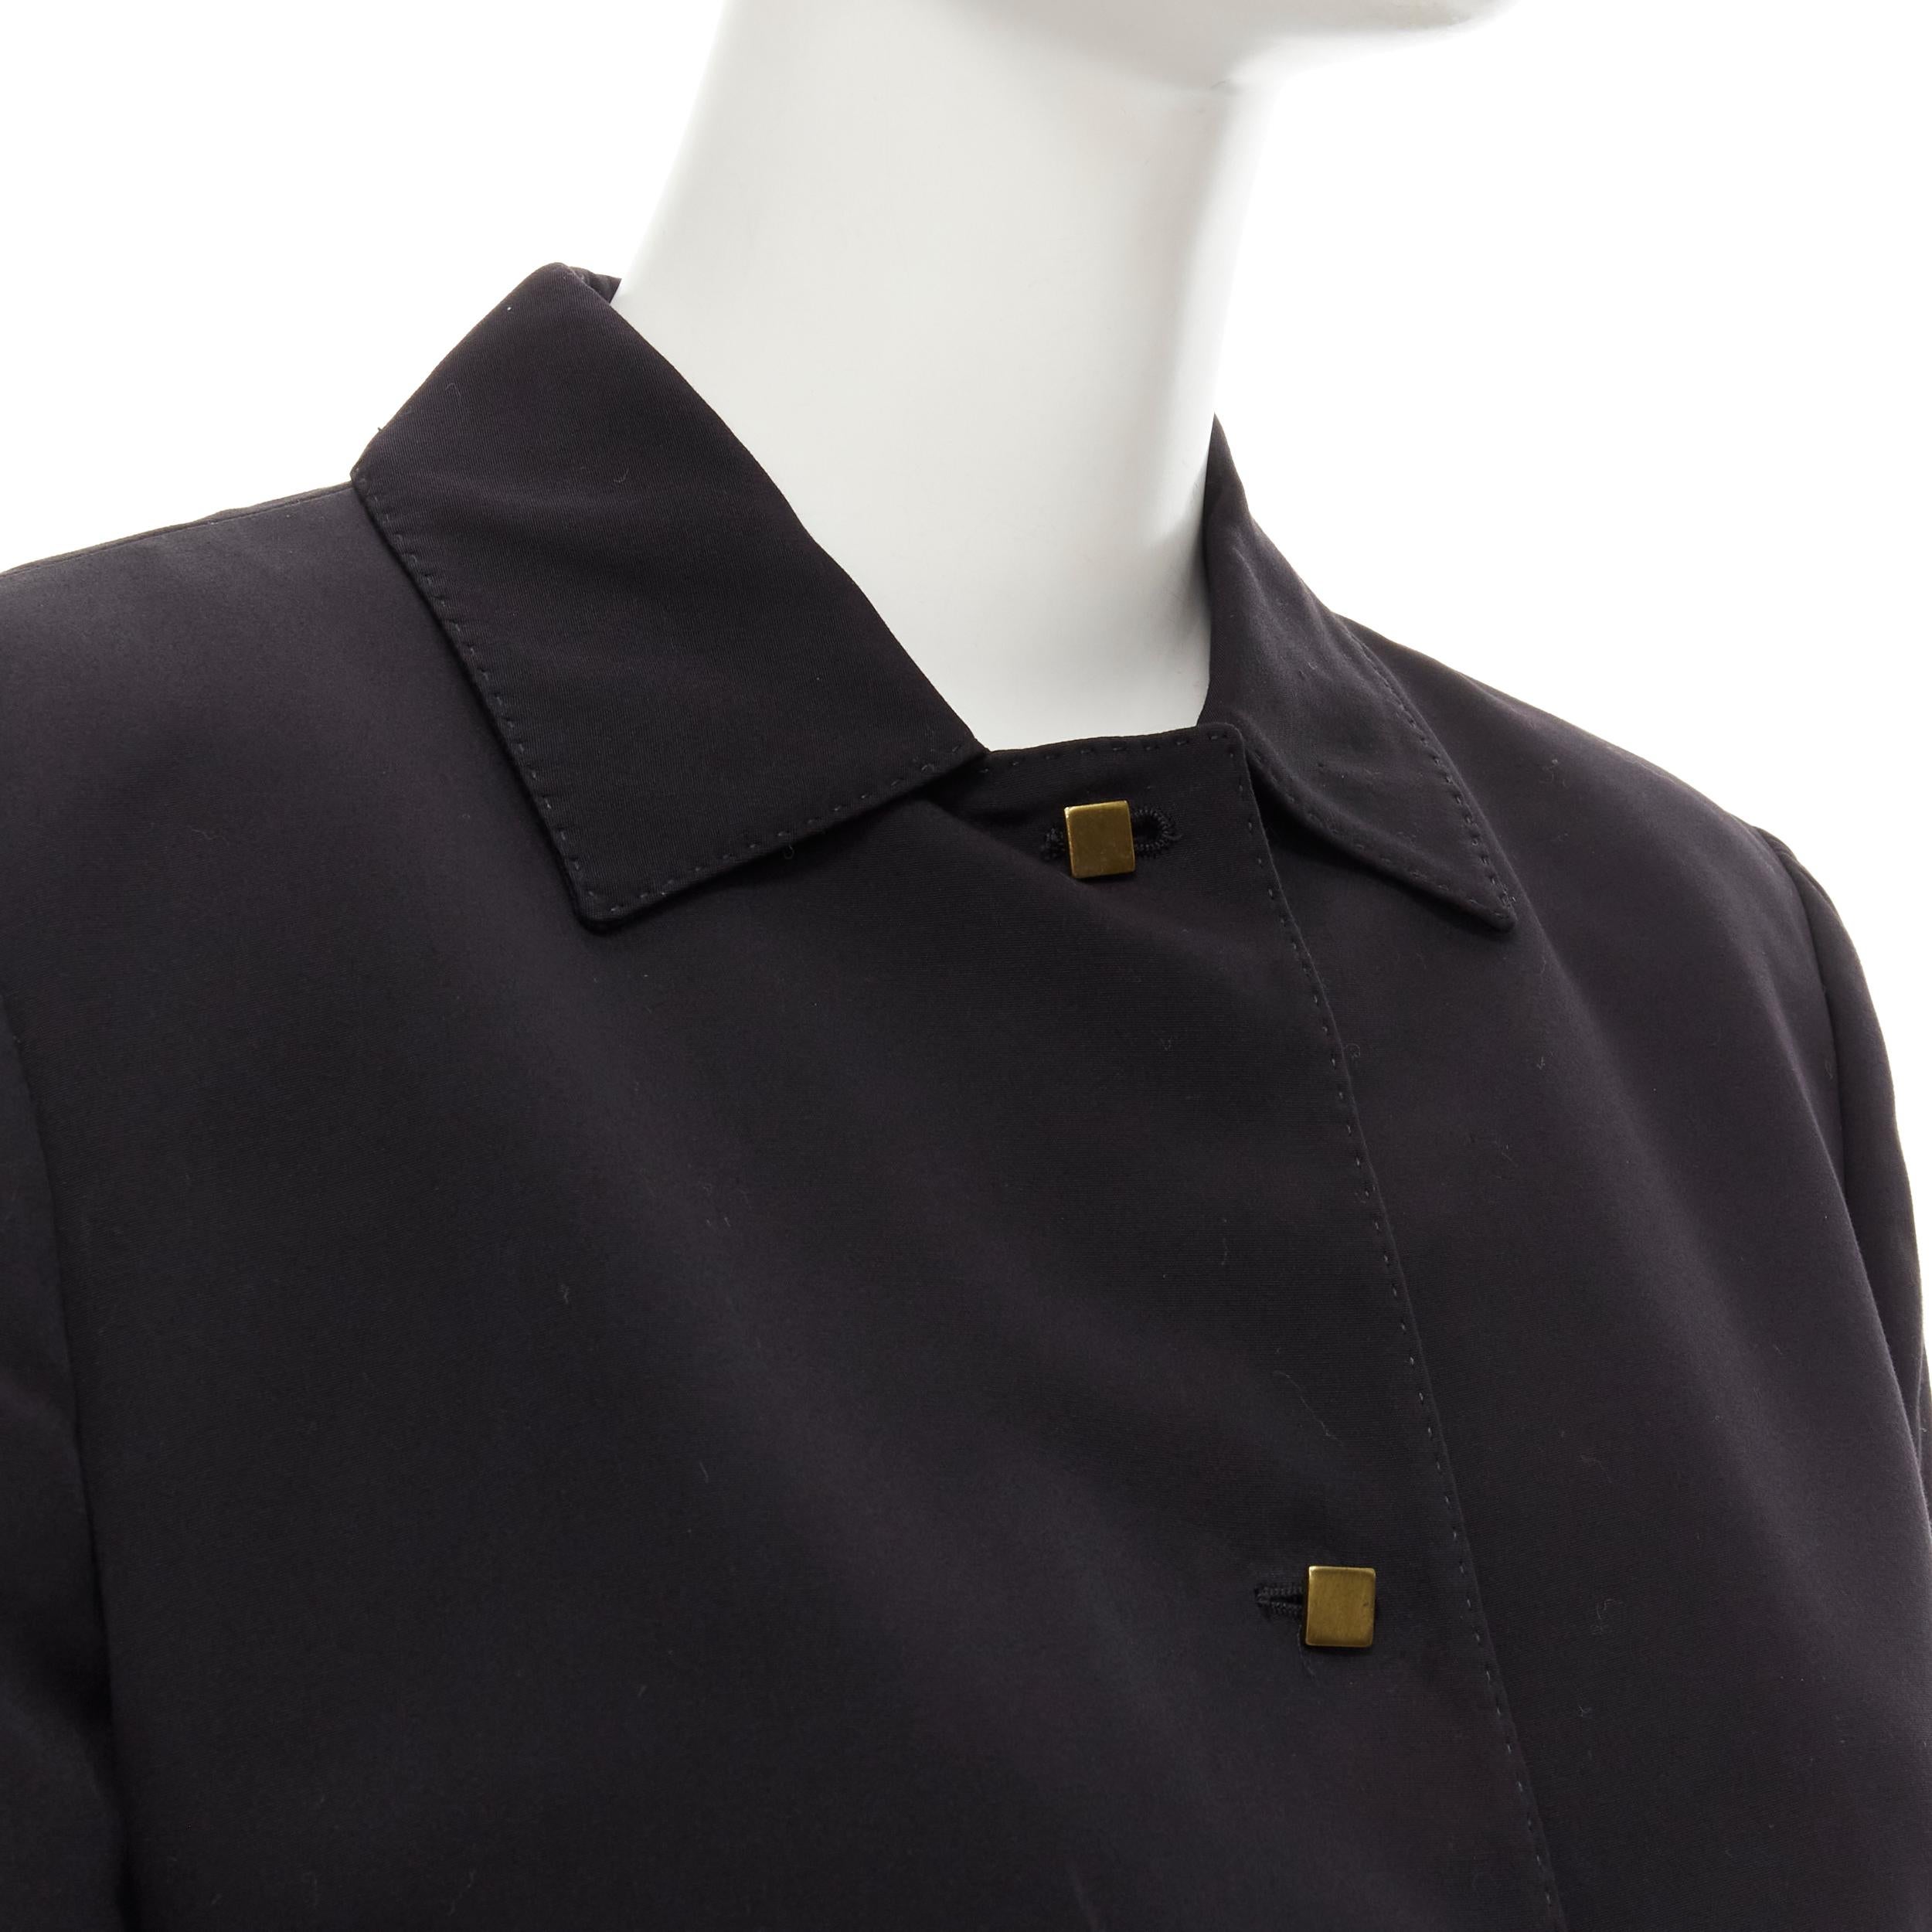 VALENTINO Vintage copper tone square buttons black cropped blazer IT44 L
Reference: JYLM/A00013
Brand: Valentino
Material: Cotton, Viscose
Color: Black, Gold
Pattern: Solid
Closure: Button
Lining: Black Fabric
Made in: Italy

CONDITION:
Condition: